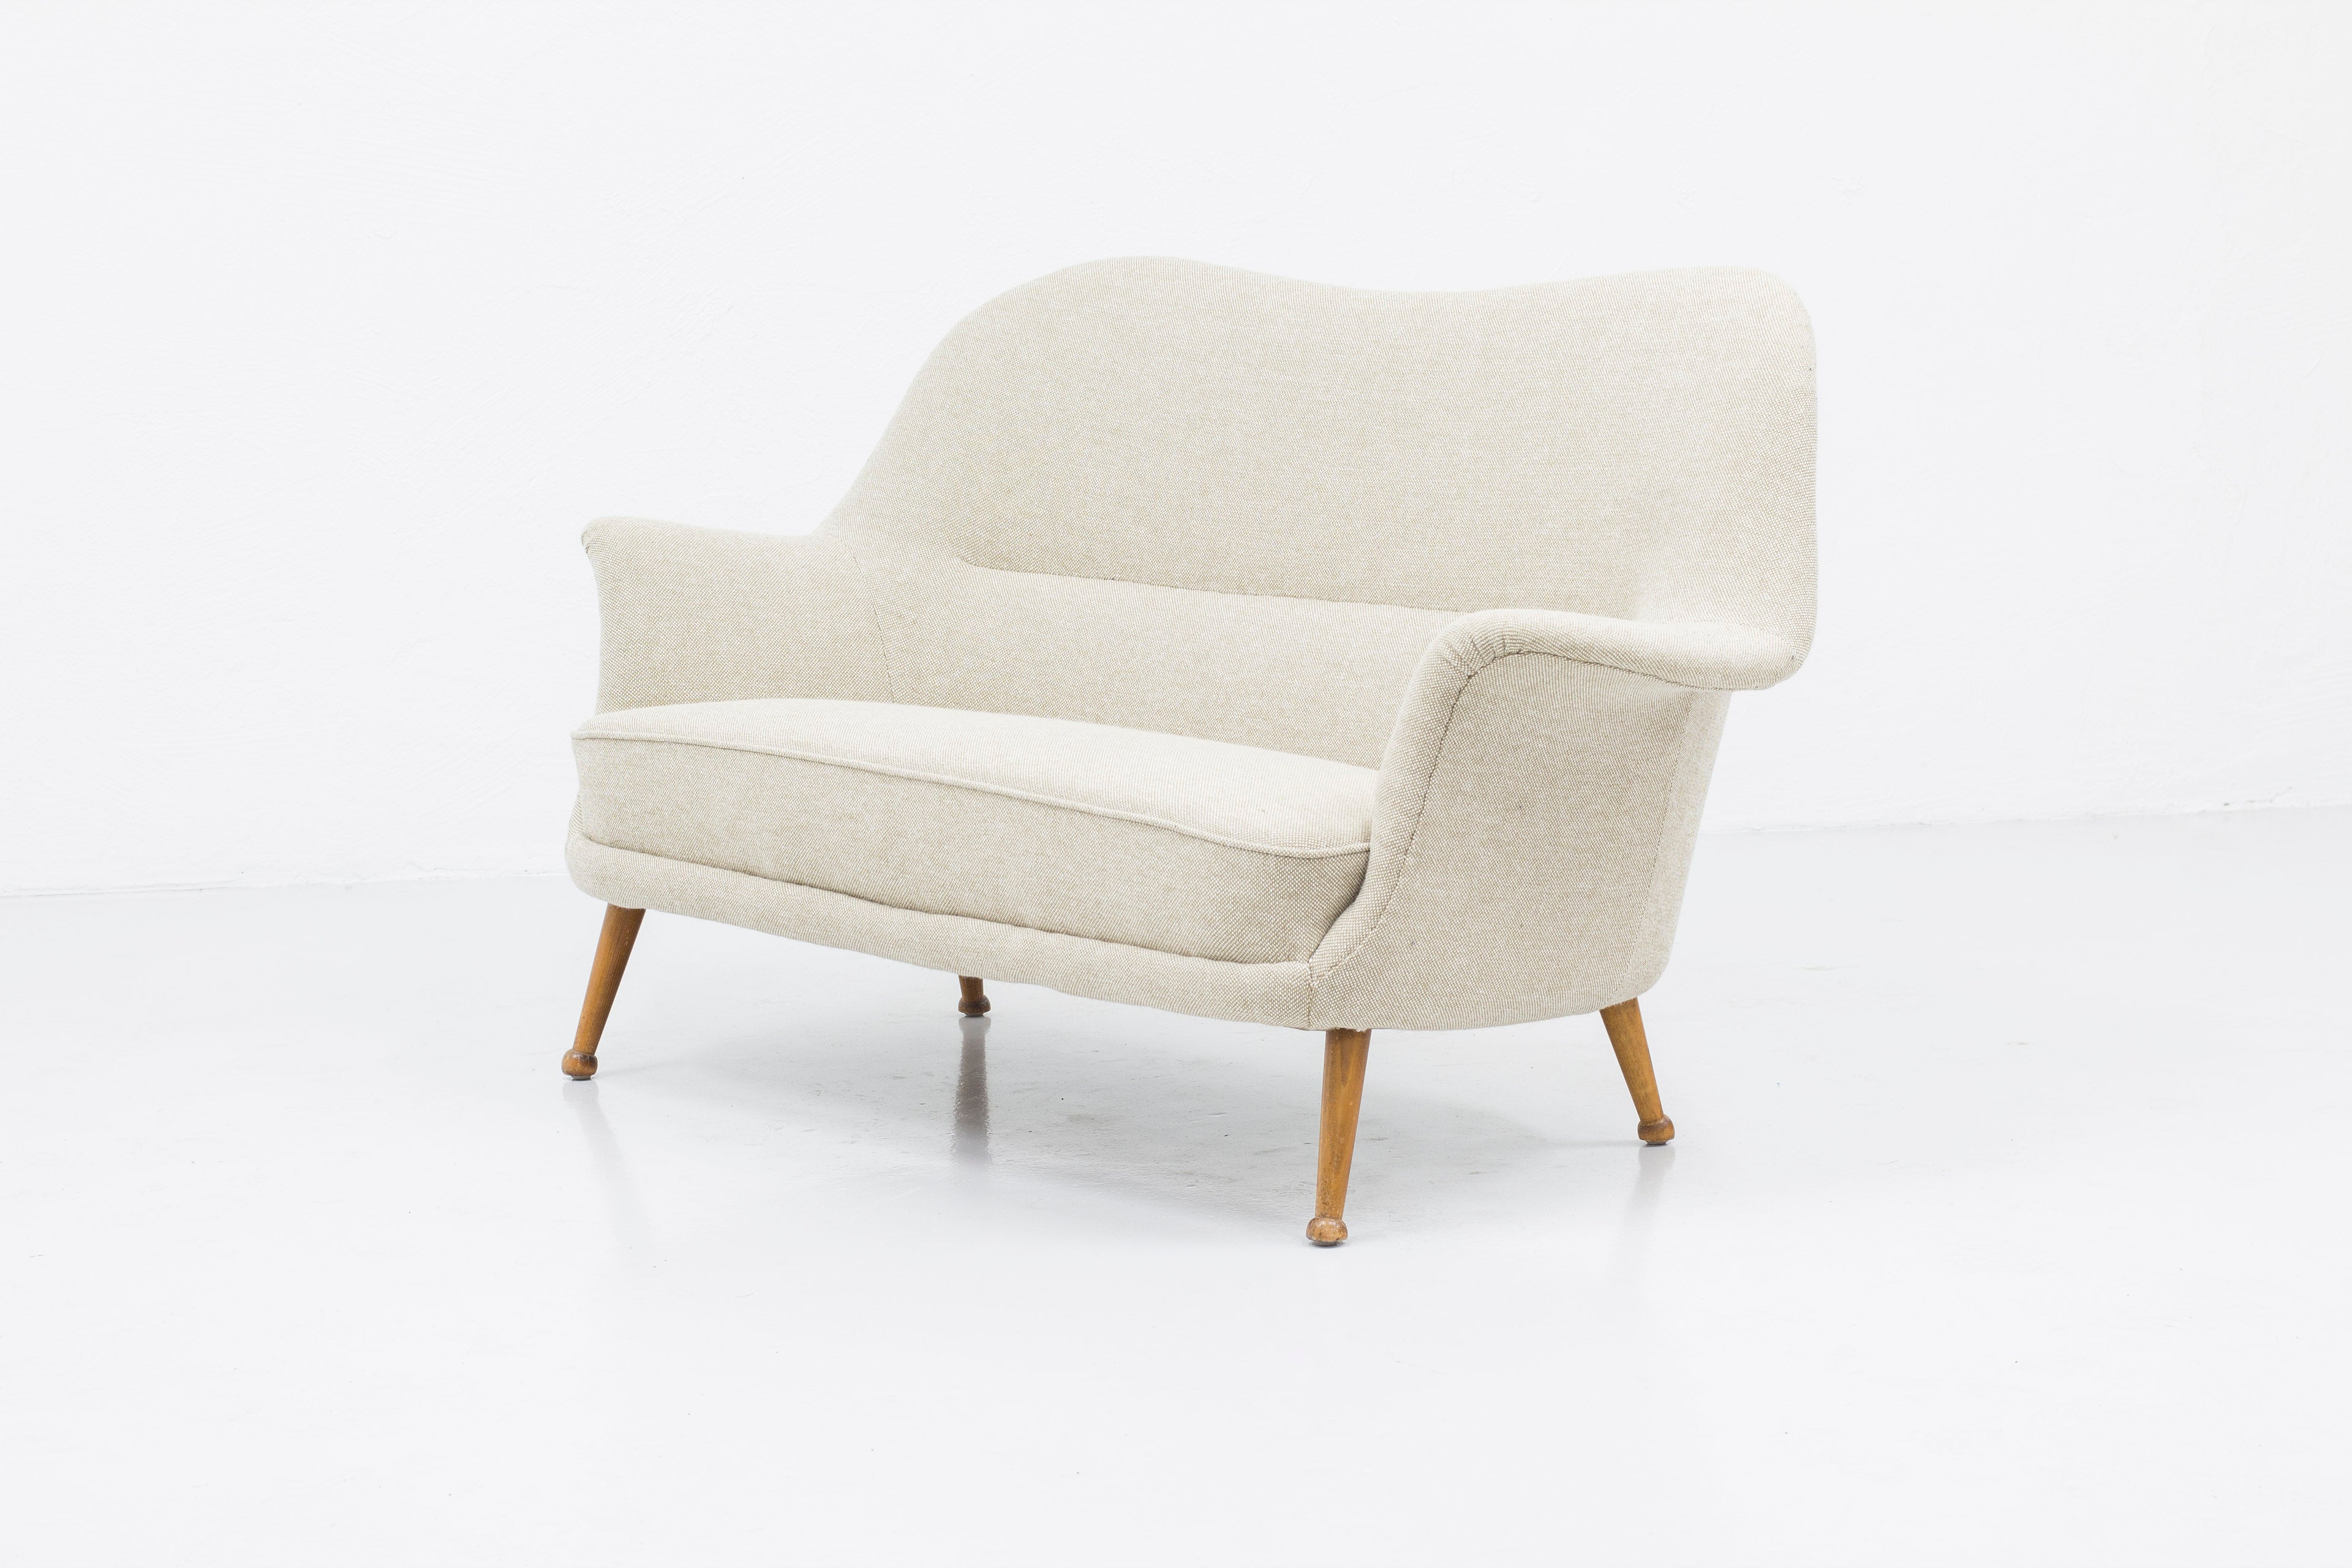 "Divina" sofa by Arne Norell